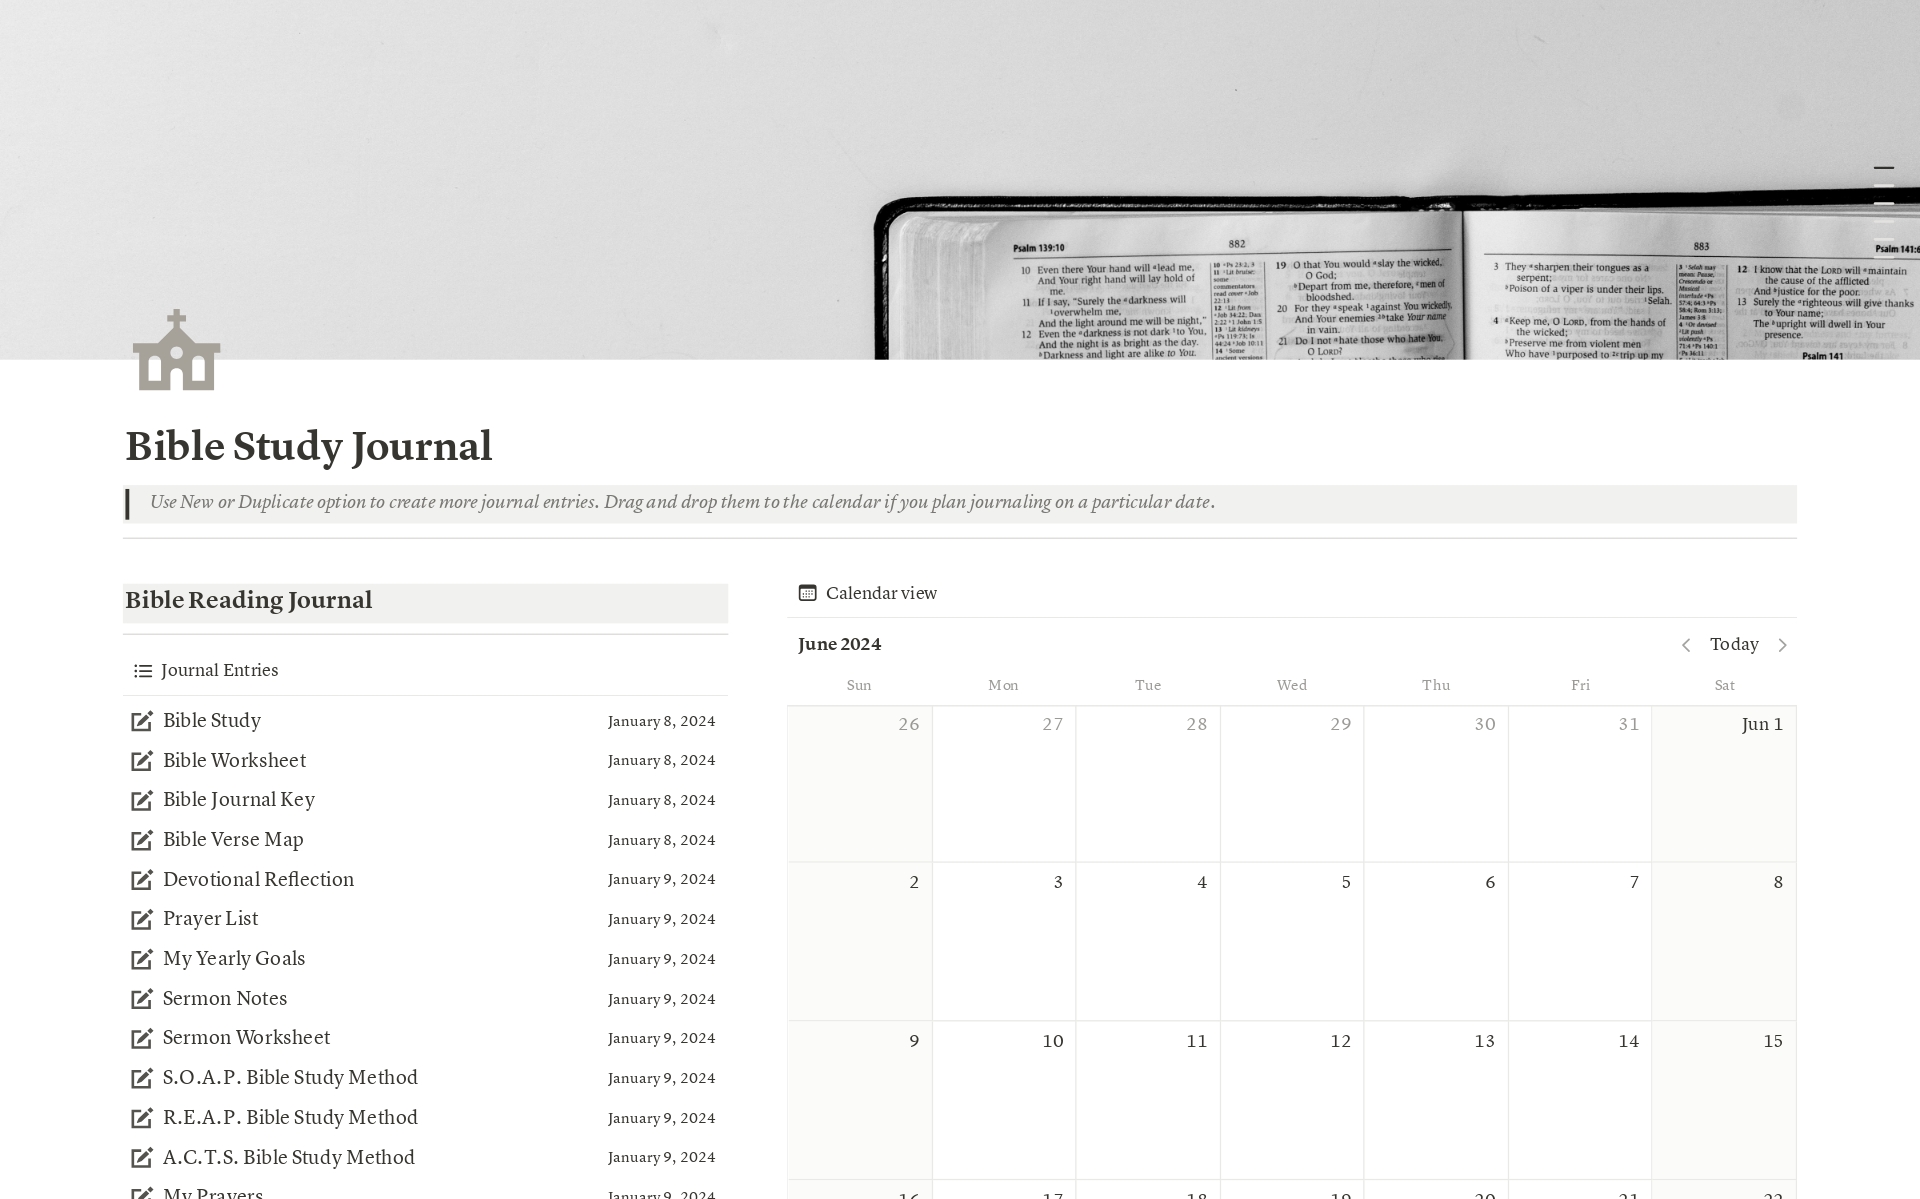 Created for believers seeking to integrate technology and faith, this digital Bible Study journal will transform your engagement with sacred scriptures. Track your daily readings and reflections using this well-organized Notion template. 